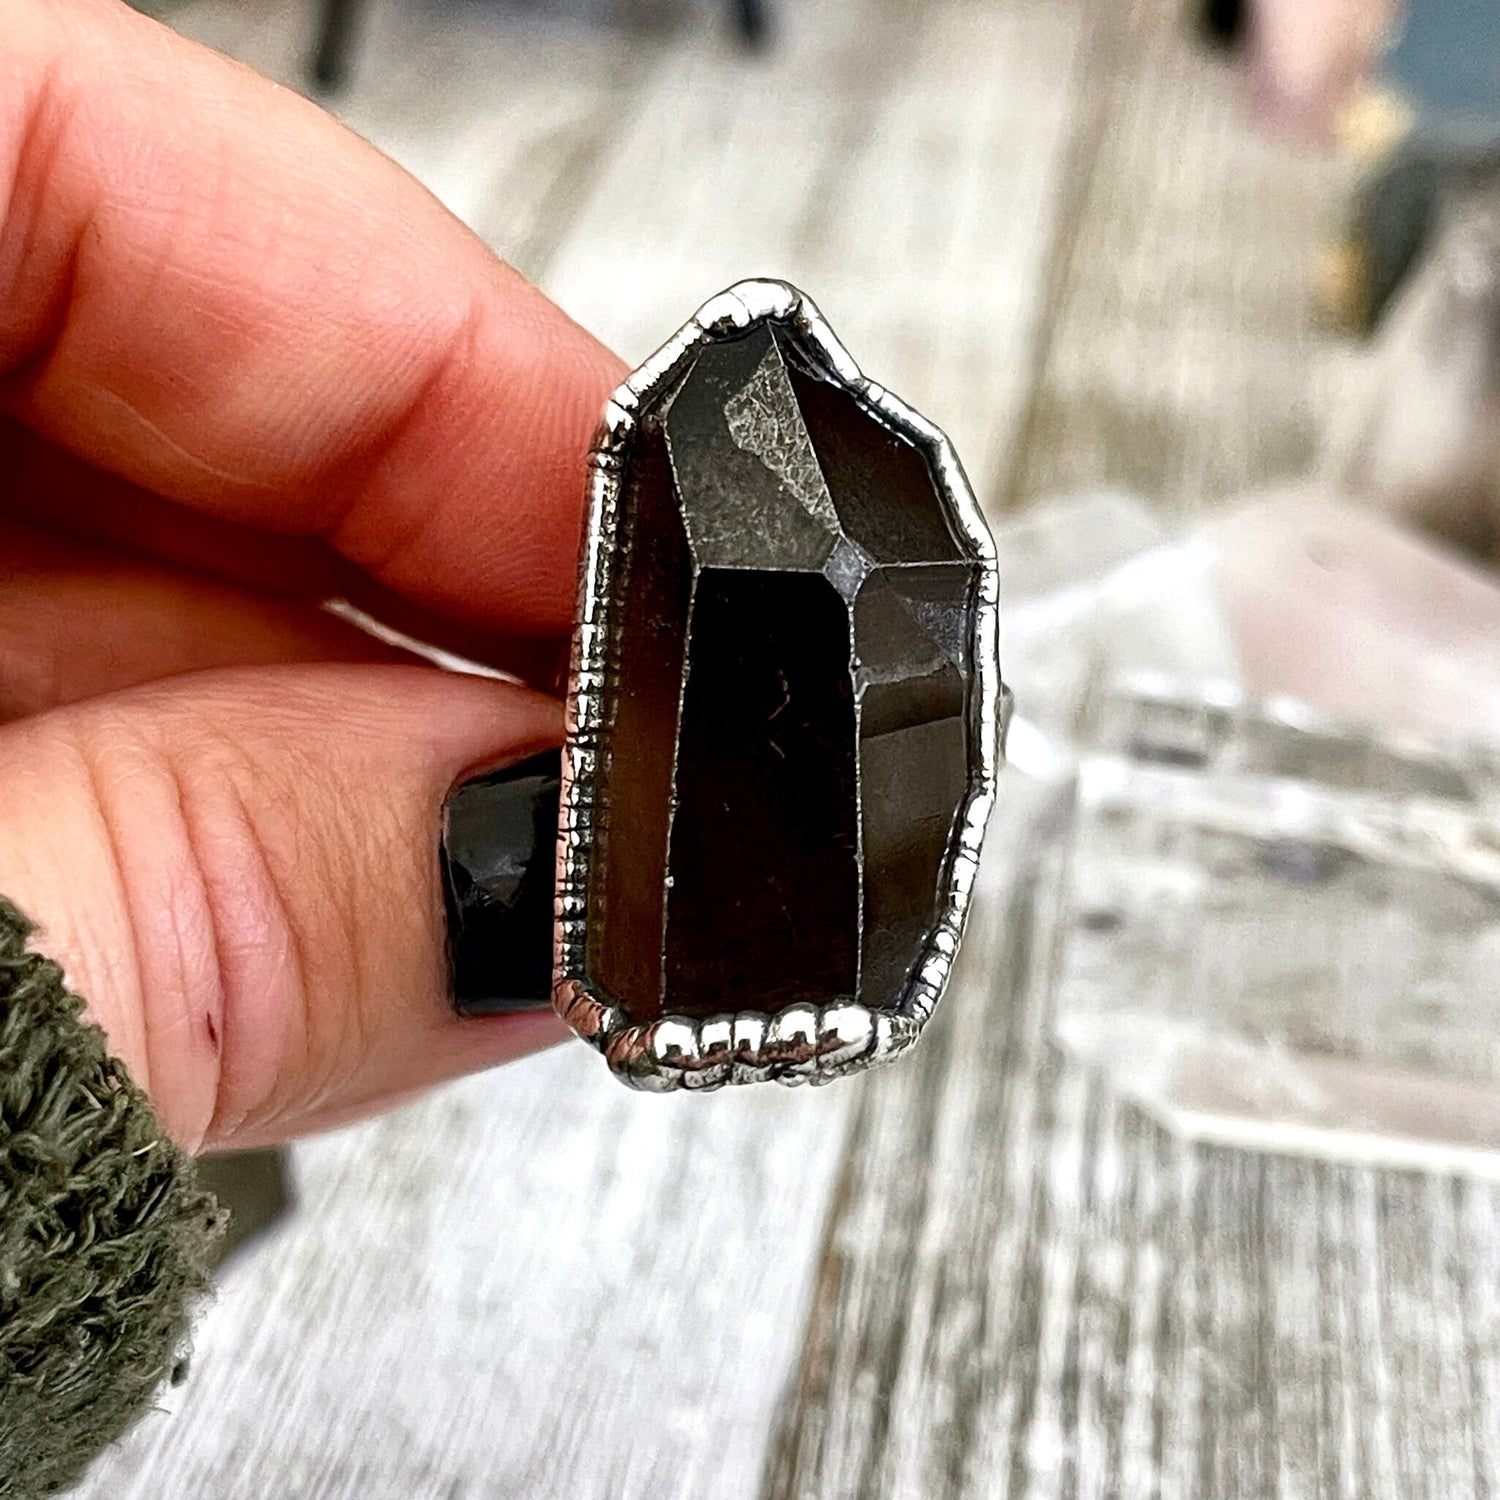 Size 7.5 Raw Smoky Quartz Crystal Cluster Ring Set in Fine Silver / Foxlark Collection - One of a Kind